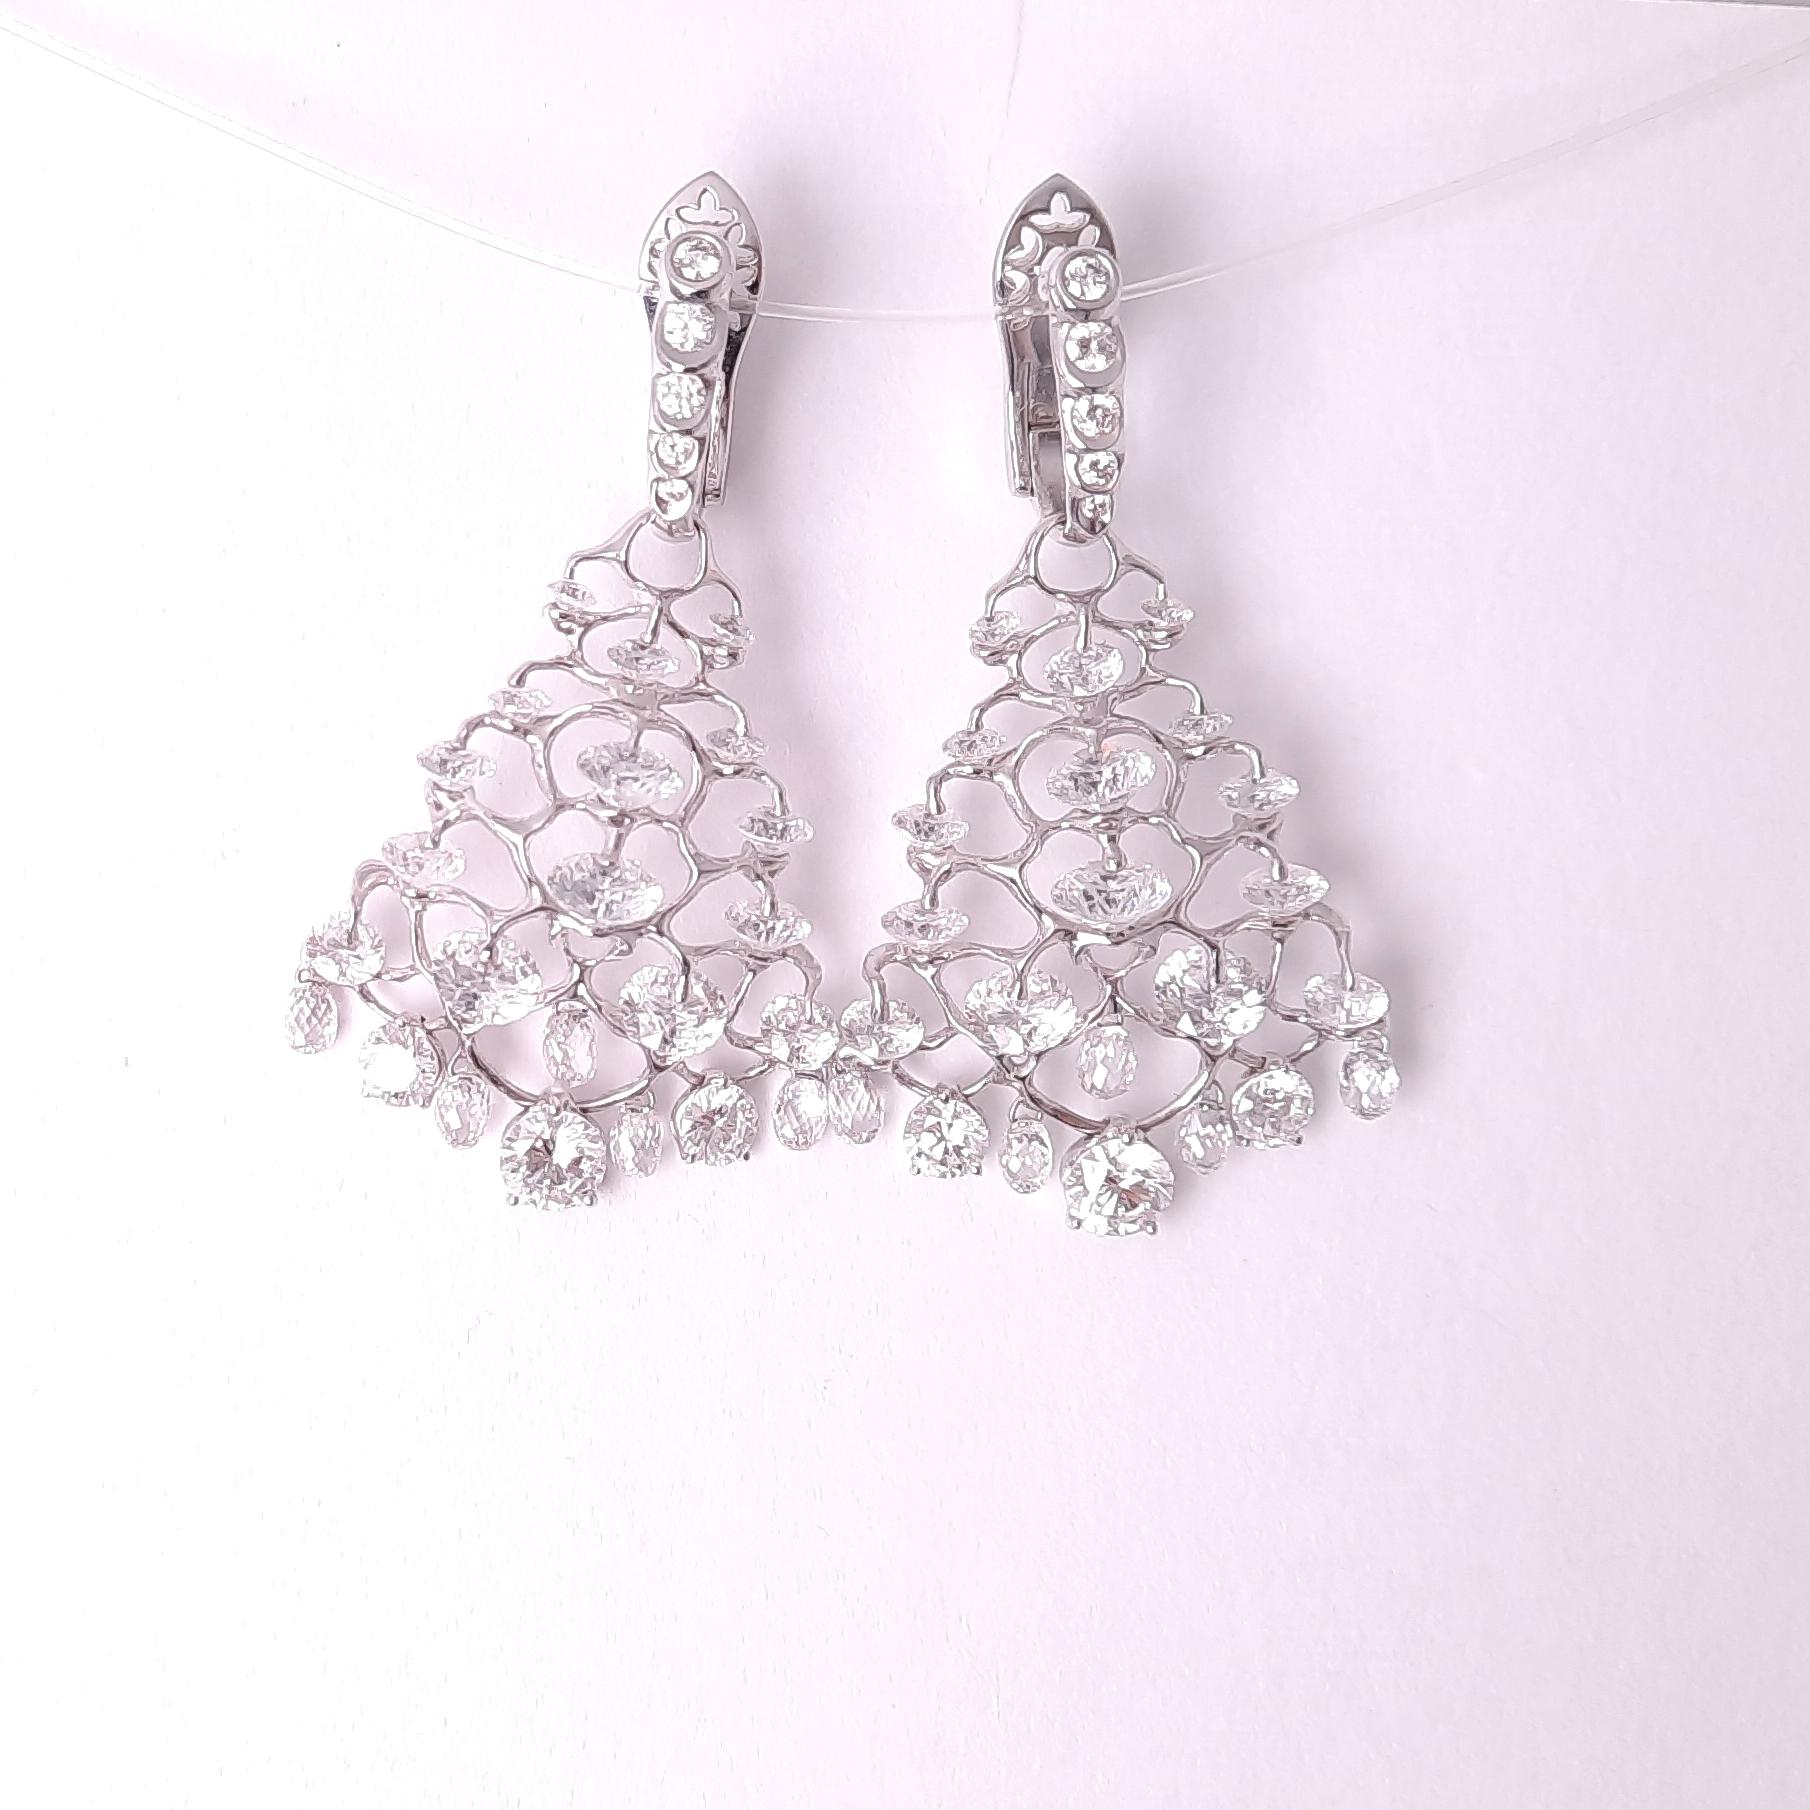 Over 11ct diamonds flow like water in the fountain design earrings. Round diamonds mounted in the international patent 